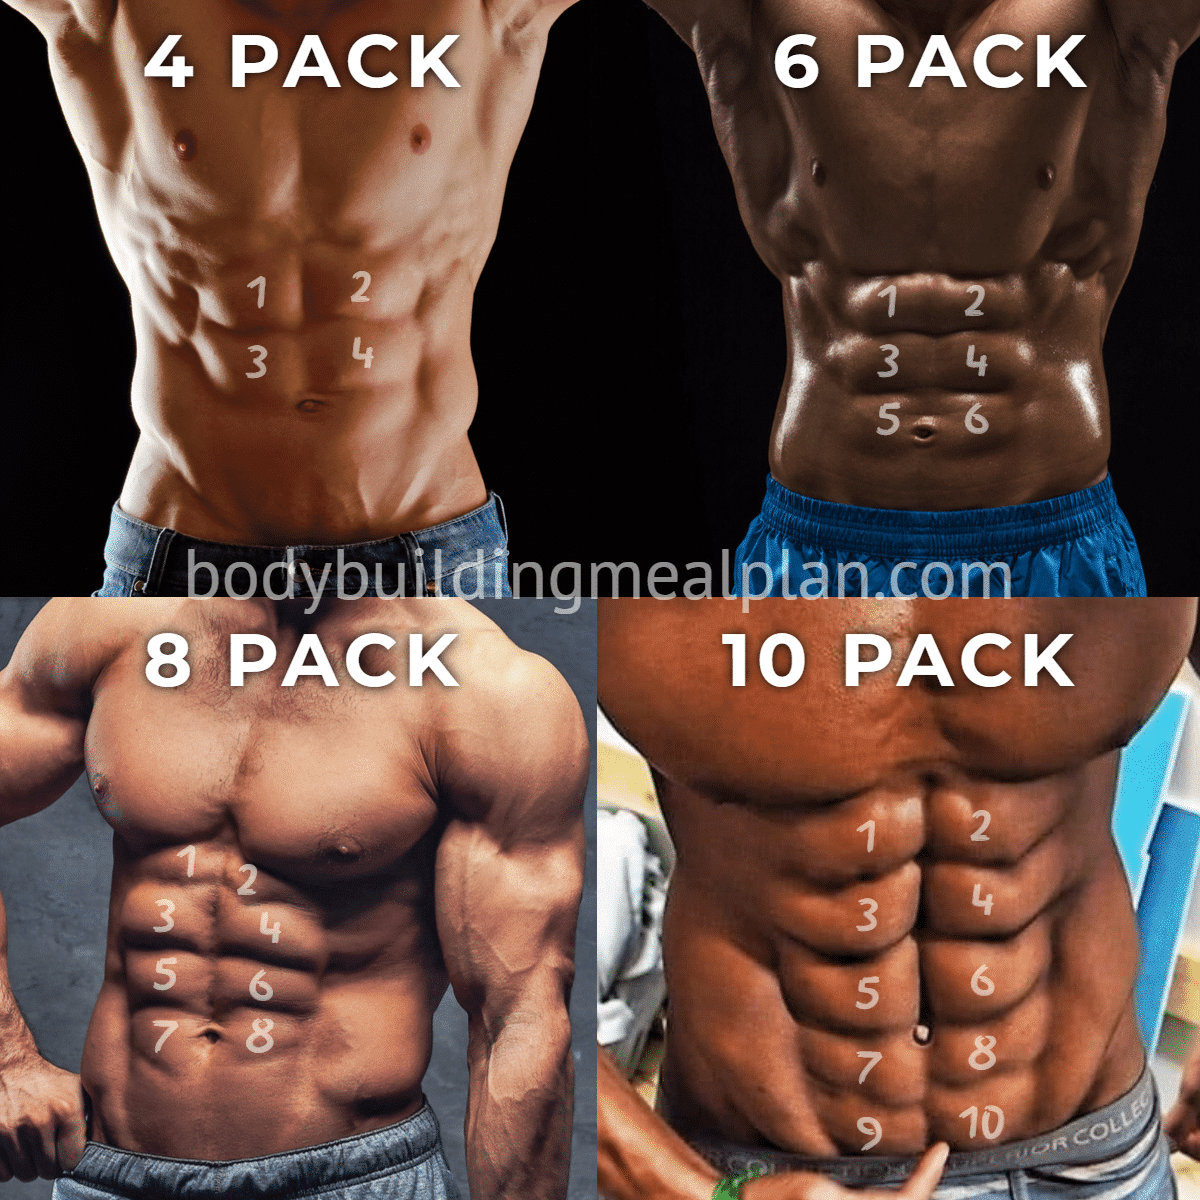 Why You Have 4 Pack Abs vs 6 Pack vs 8 Pack - SET FOR SET